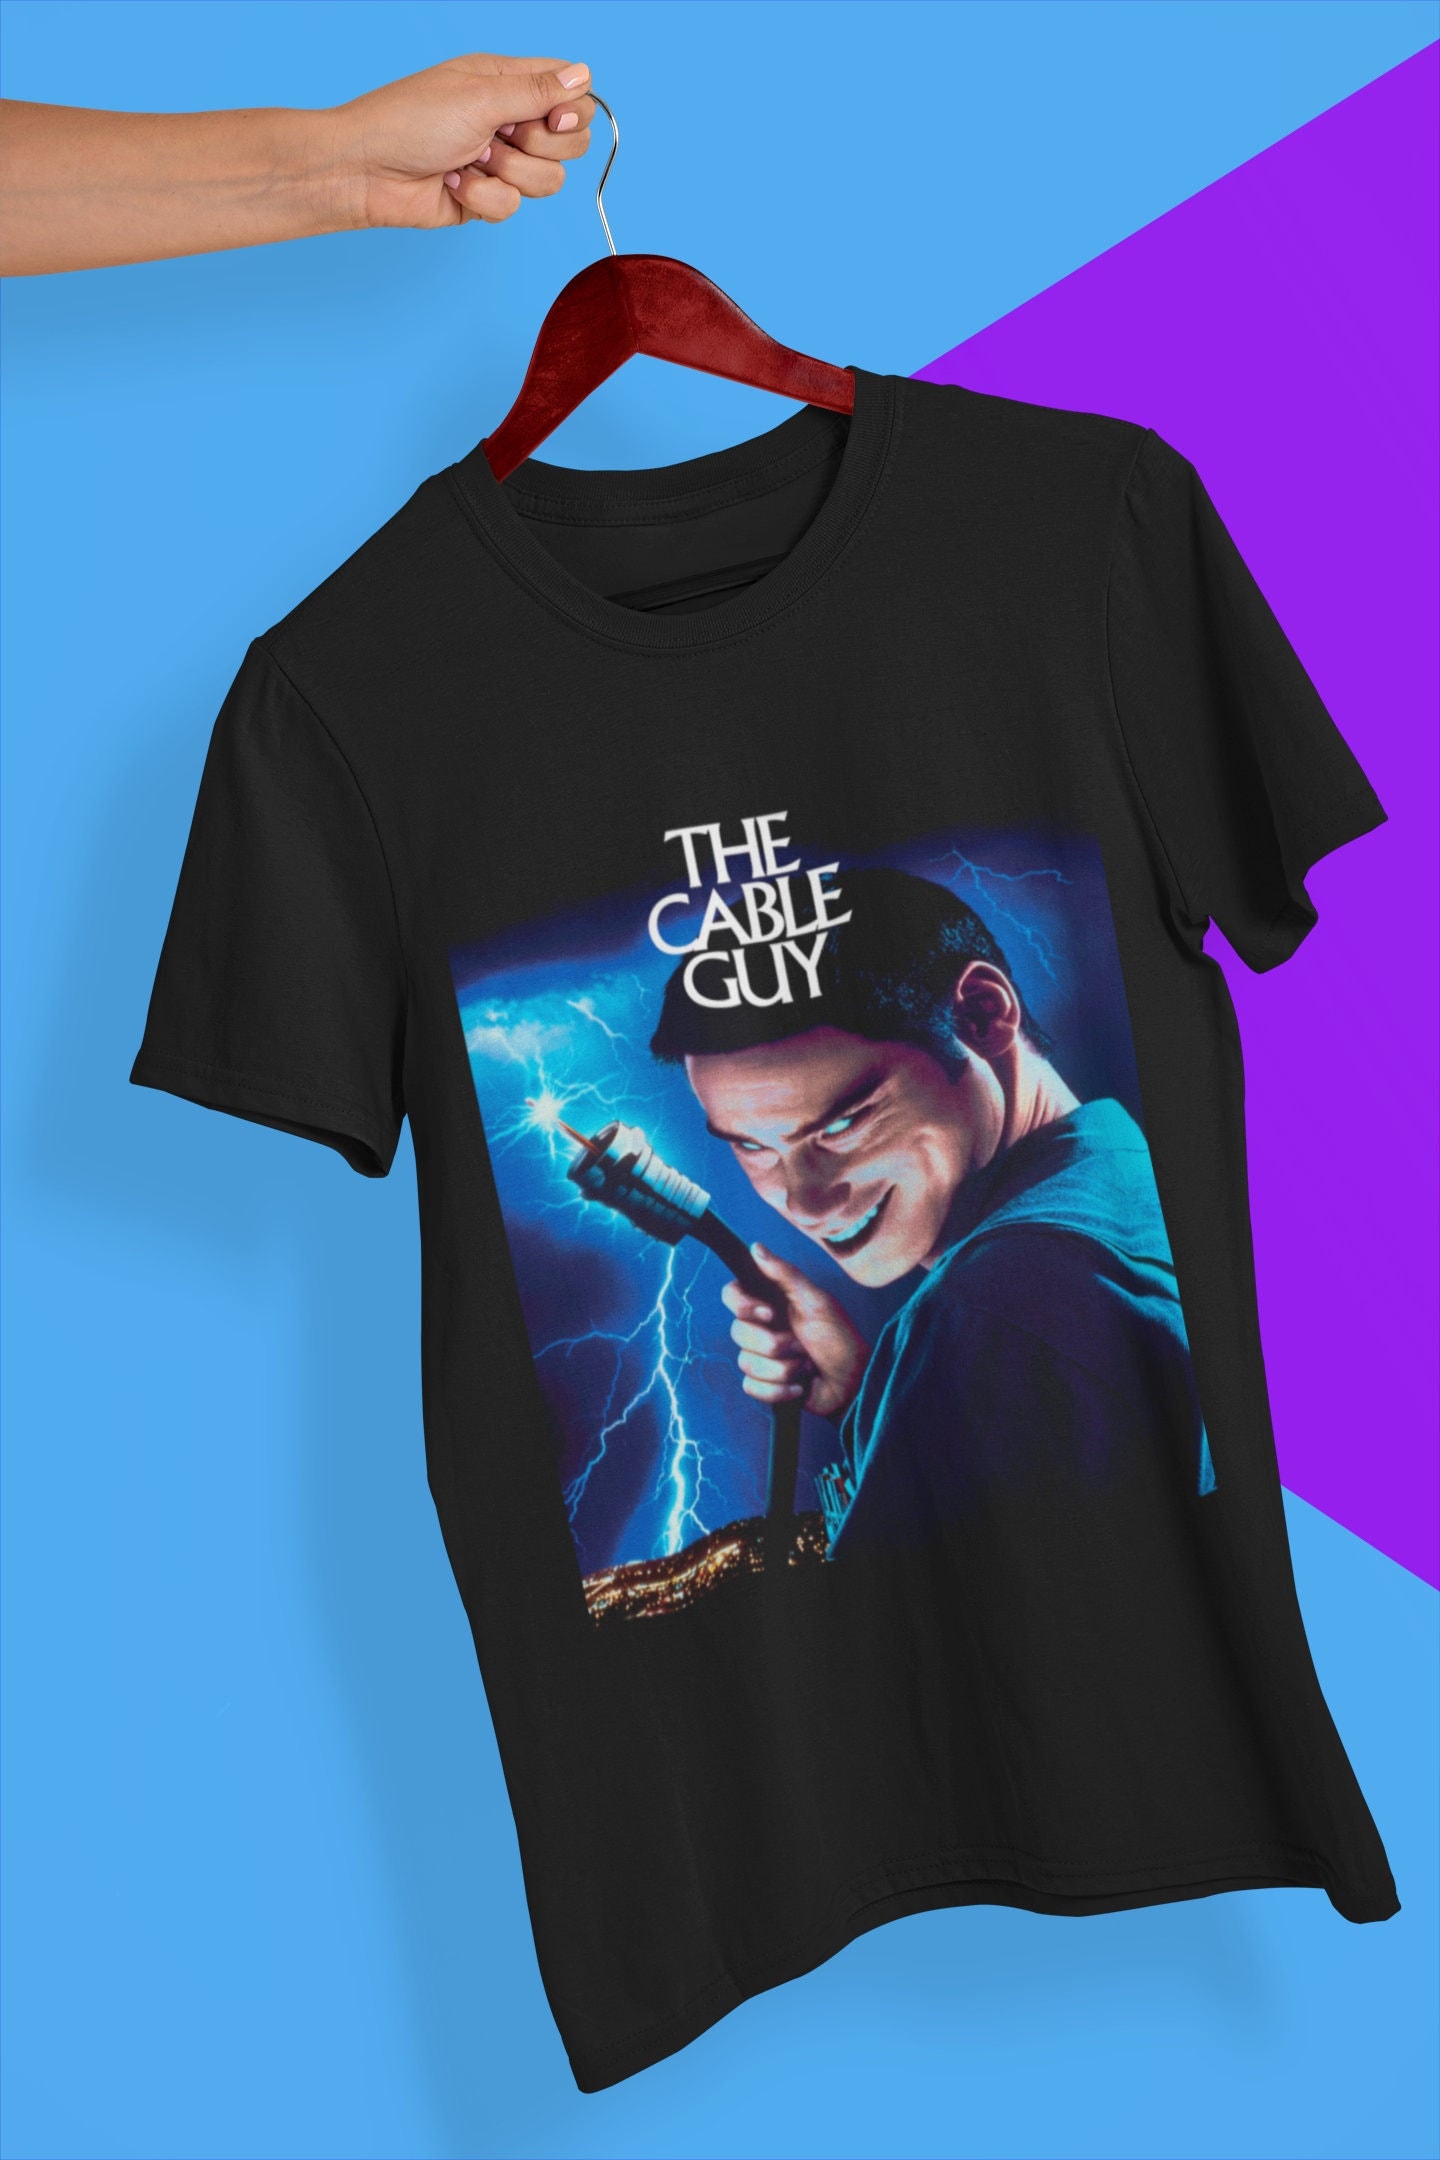 Discover The Cable Guy Soft T-Shirt, The Cable Guy Movie Poster T Shirt